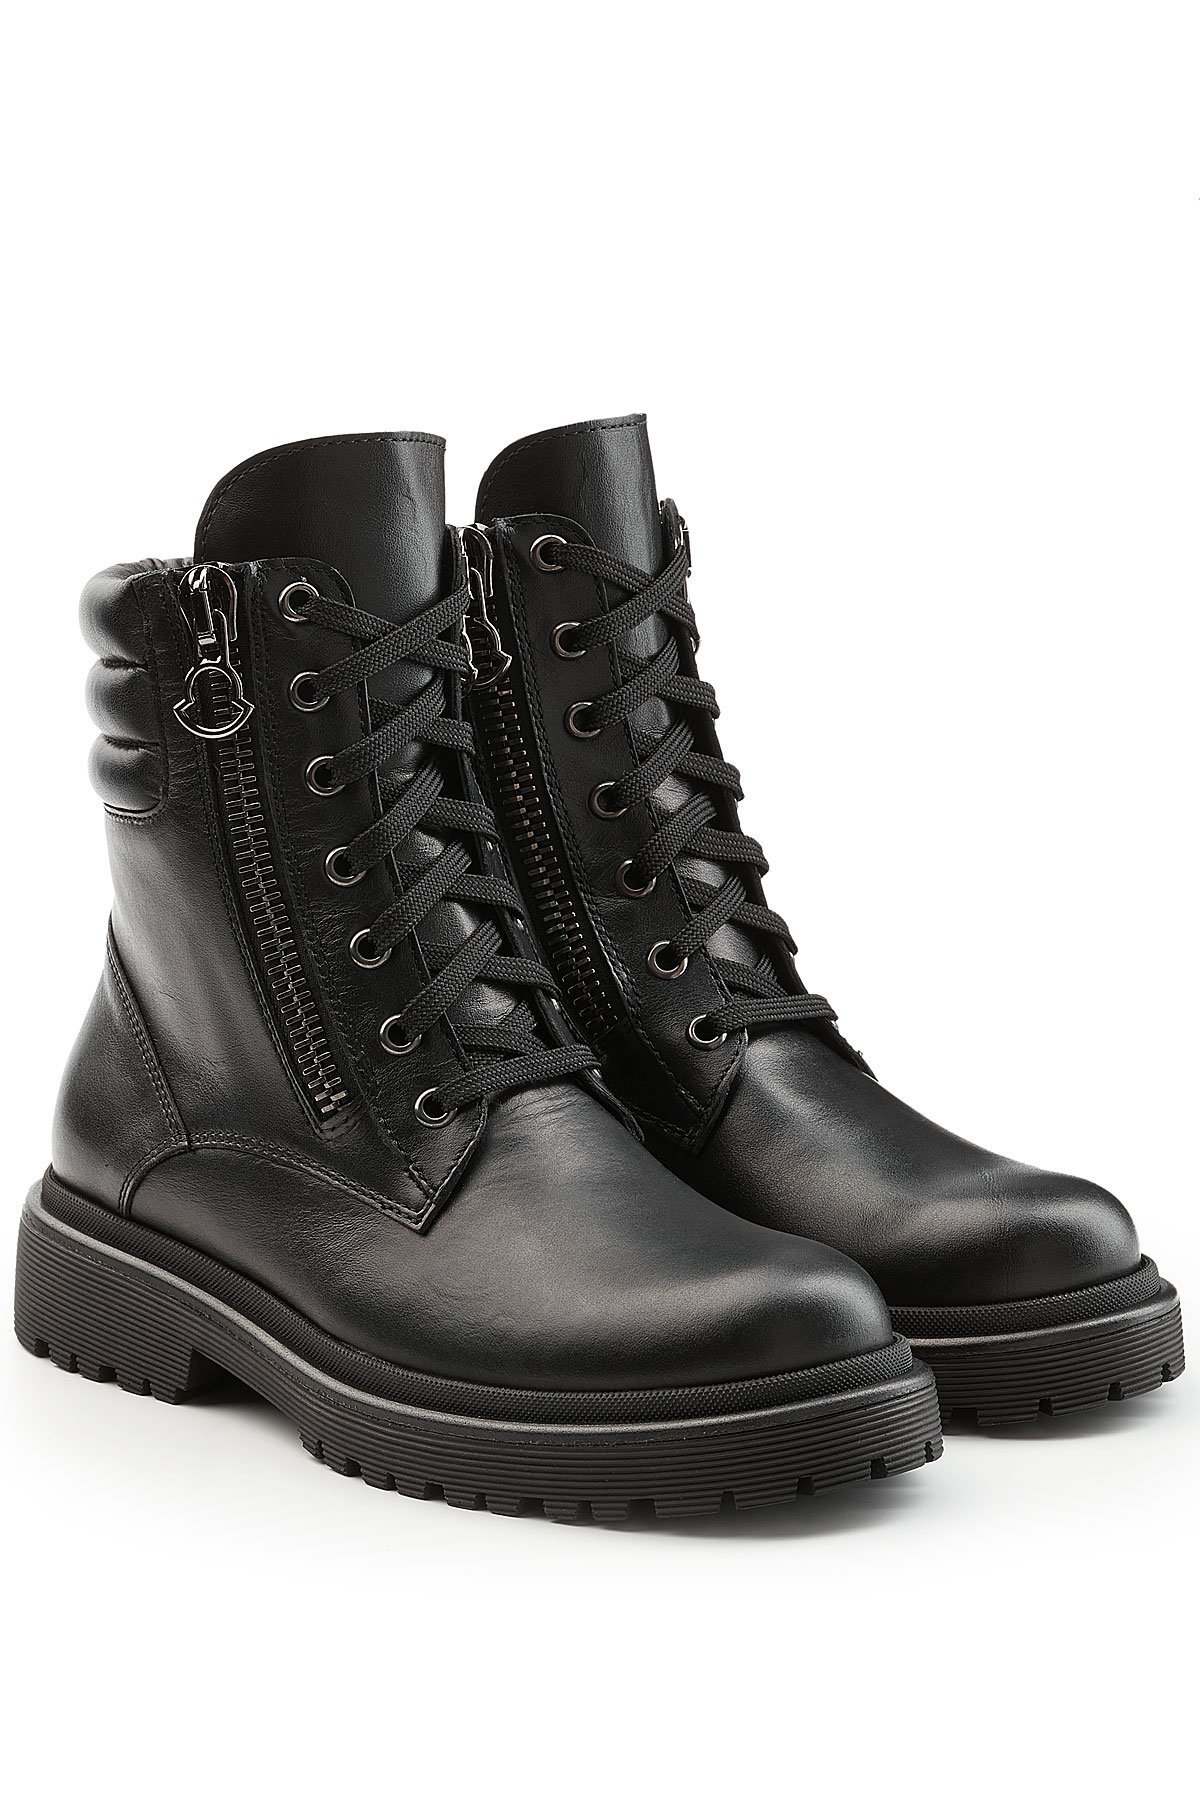 Moncler - New Vivianne Leather Ankle Boots